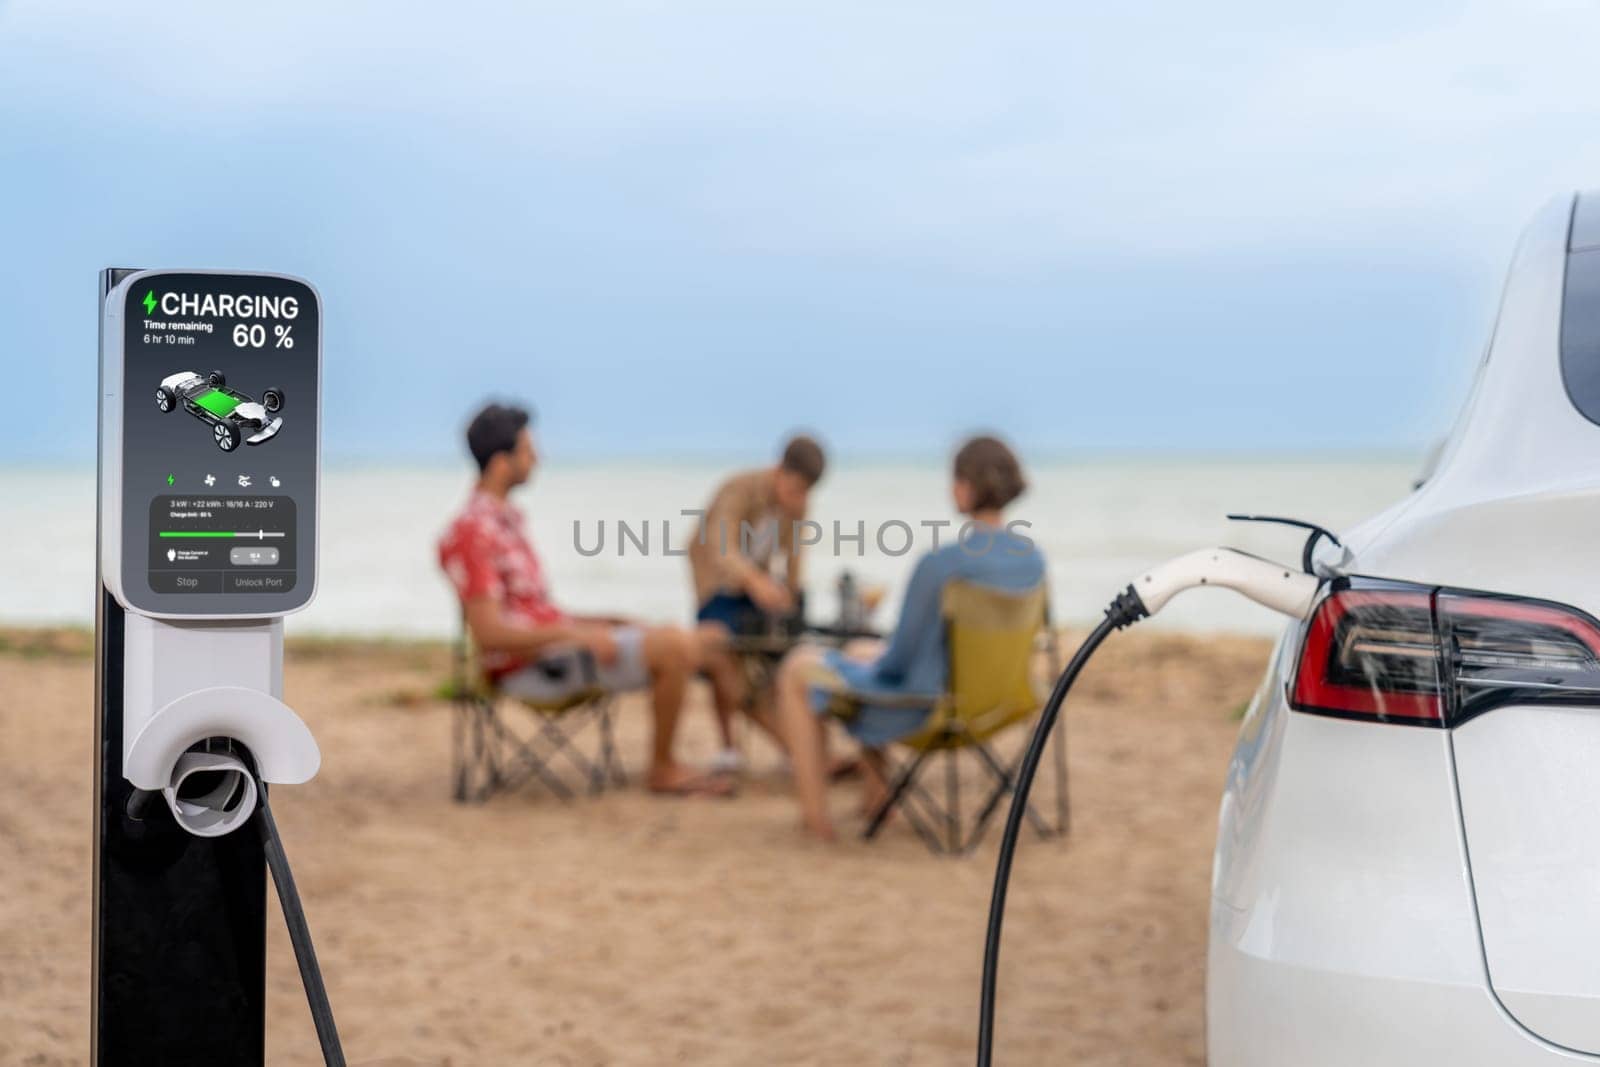 Alternative family vacation trip traveling by the beach with electric car recharging battery from EV charging station with blurred family enjoying the seascape background. Perpetual